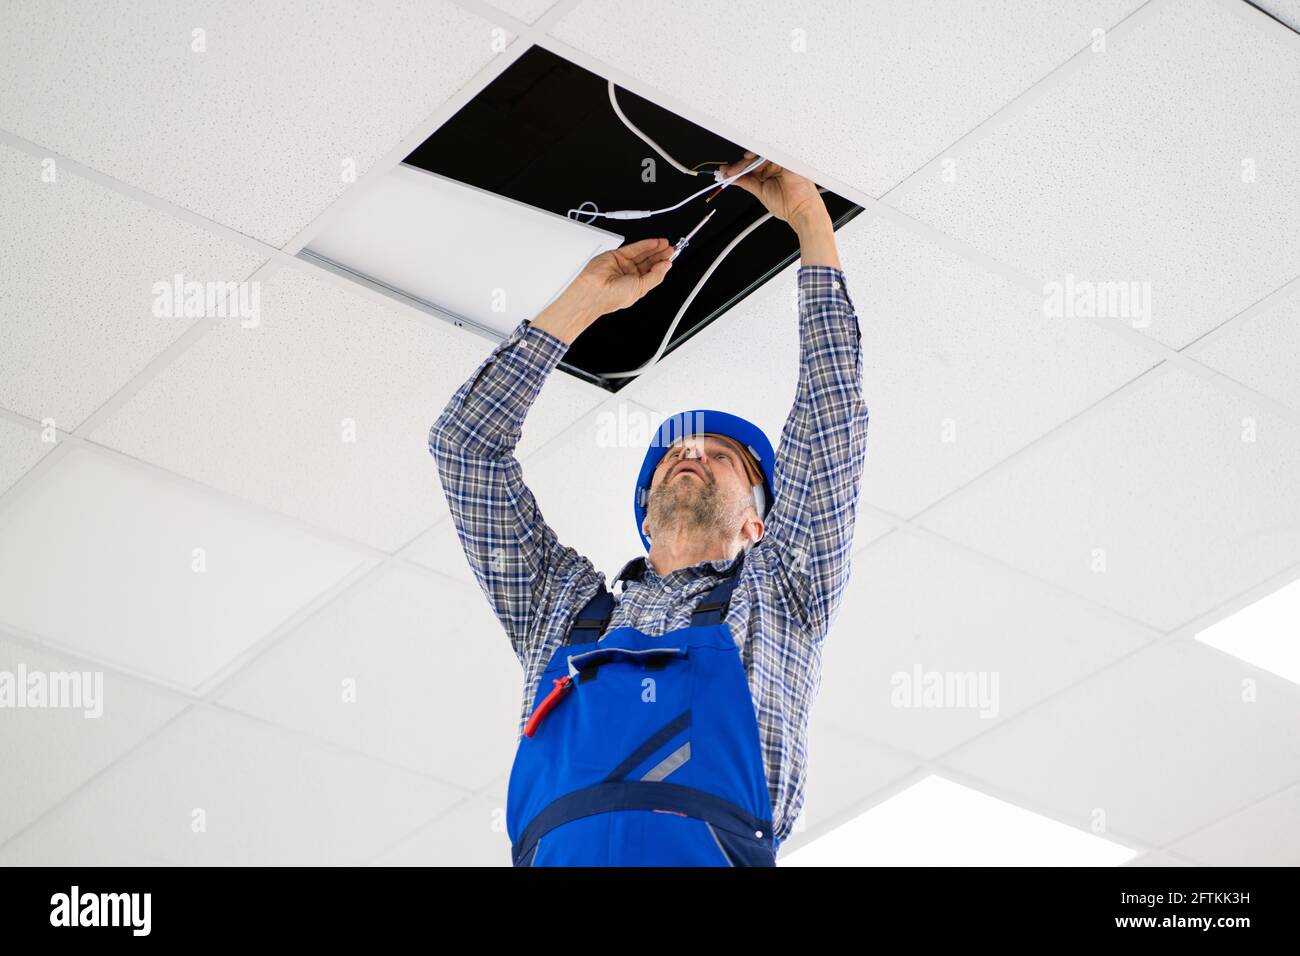 Electrician Installing LED Ceiling Light In Office Stock Photo